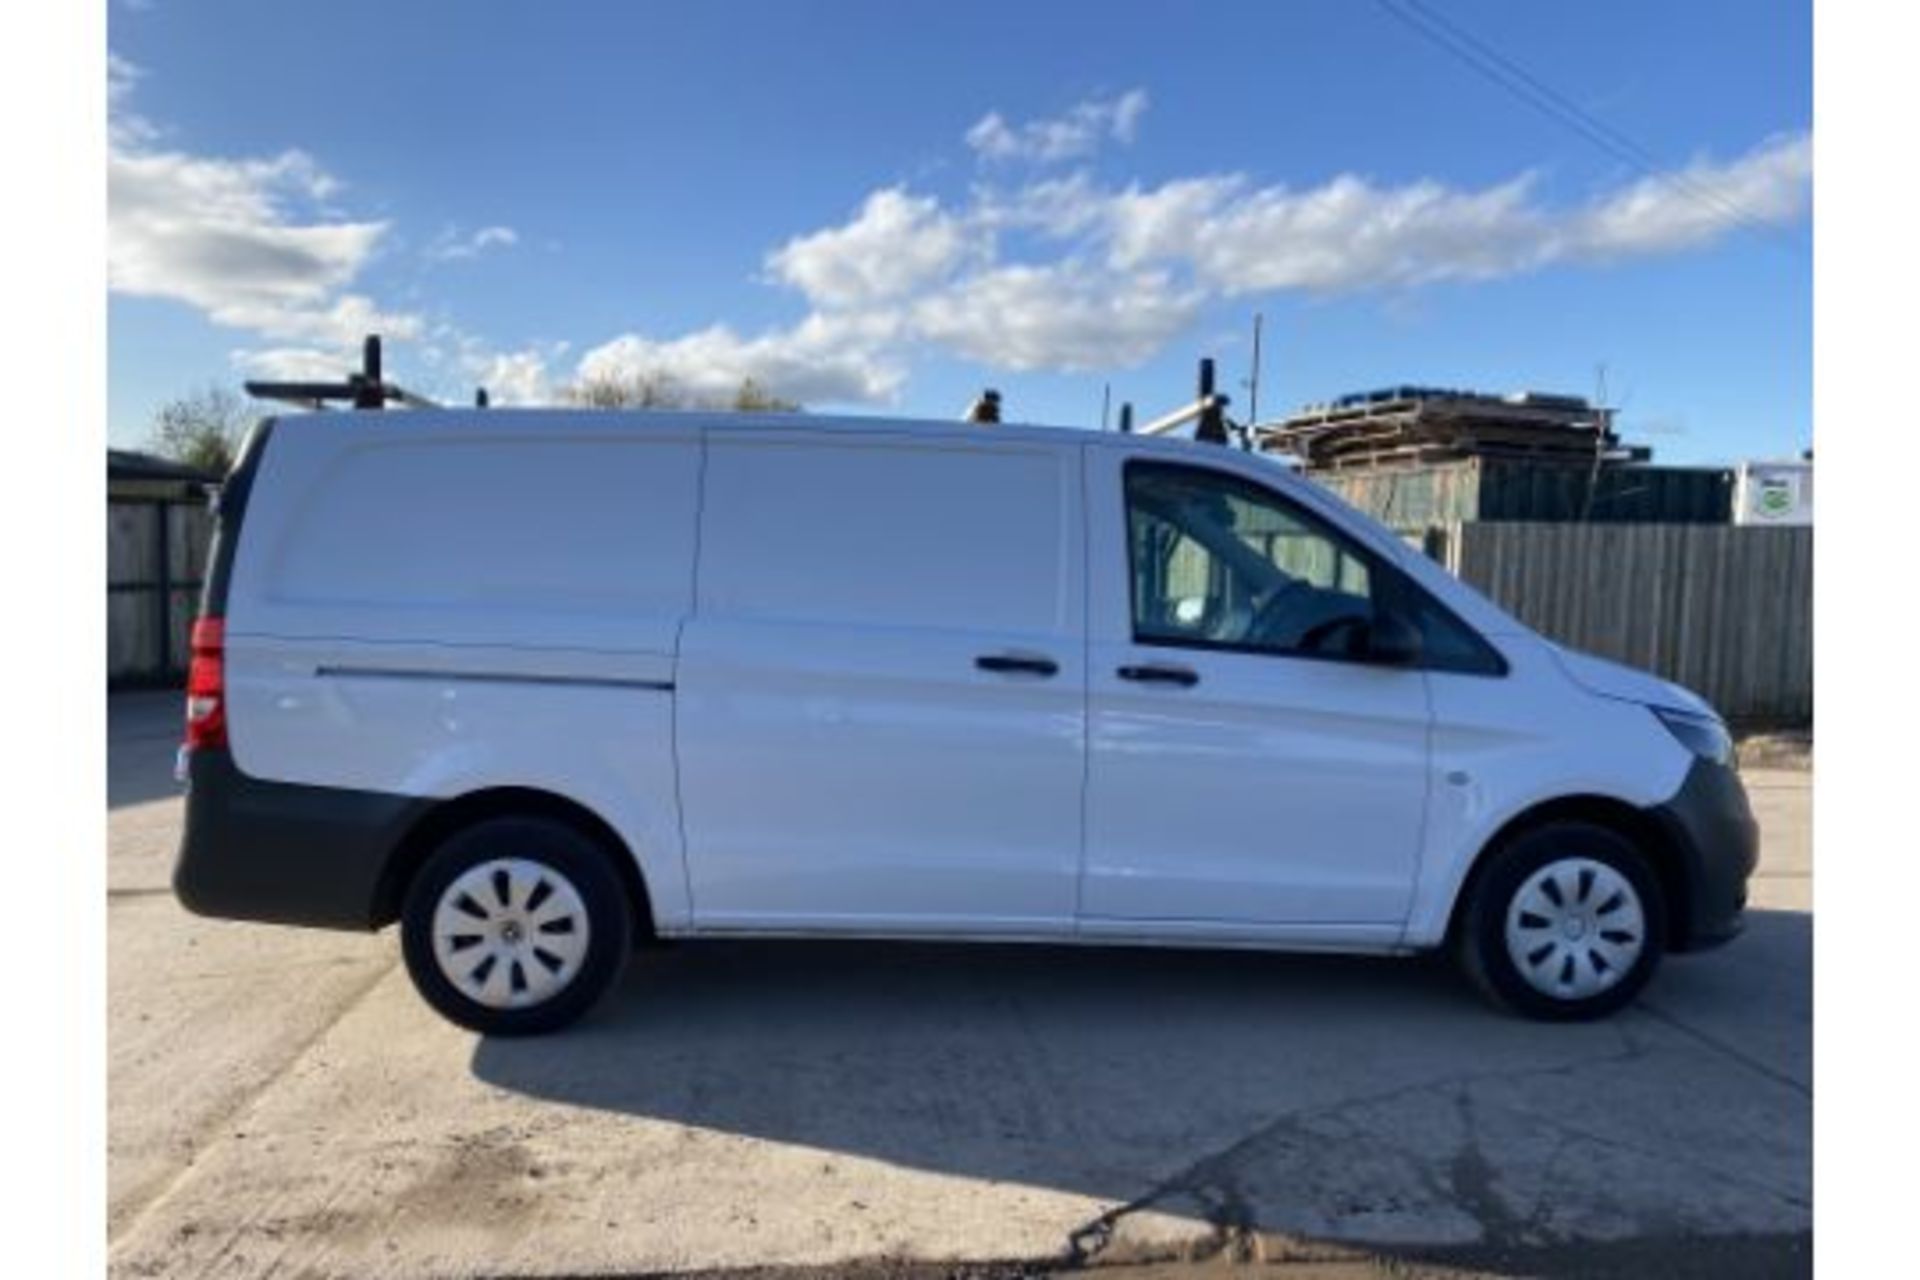 MERCEDES VITO 110CDI PURE "LWB" 20 REG - 1 OWNER - ONLY 71K MILES - EURO 6 - LOOK! - Image 2 of 10